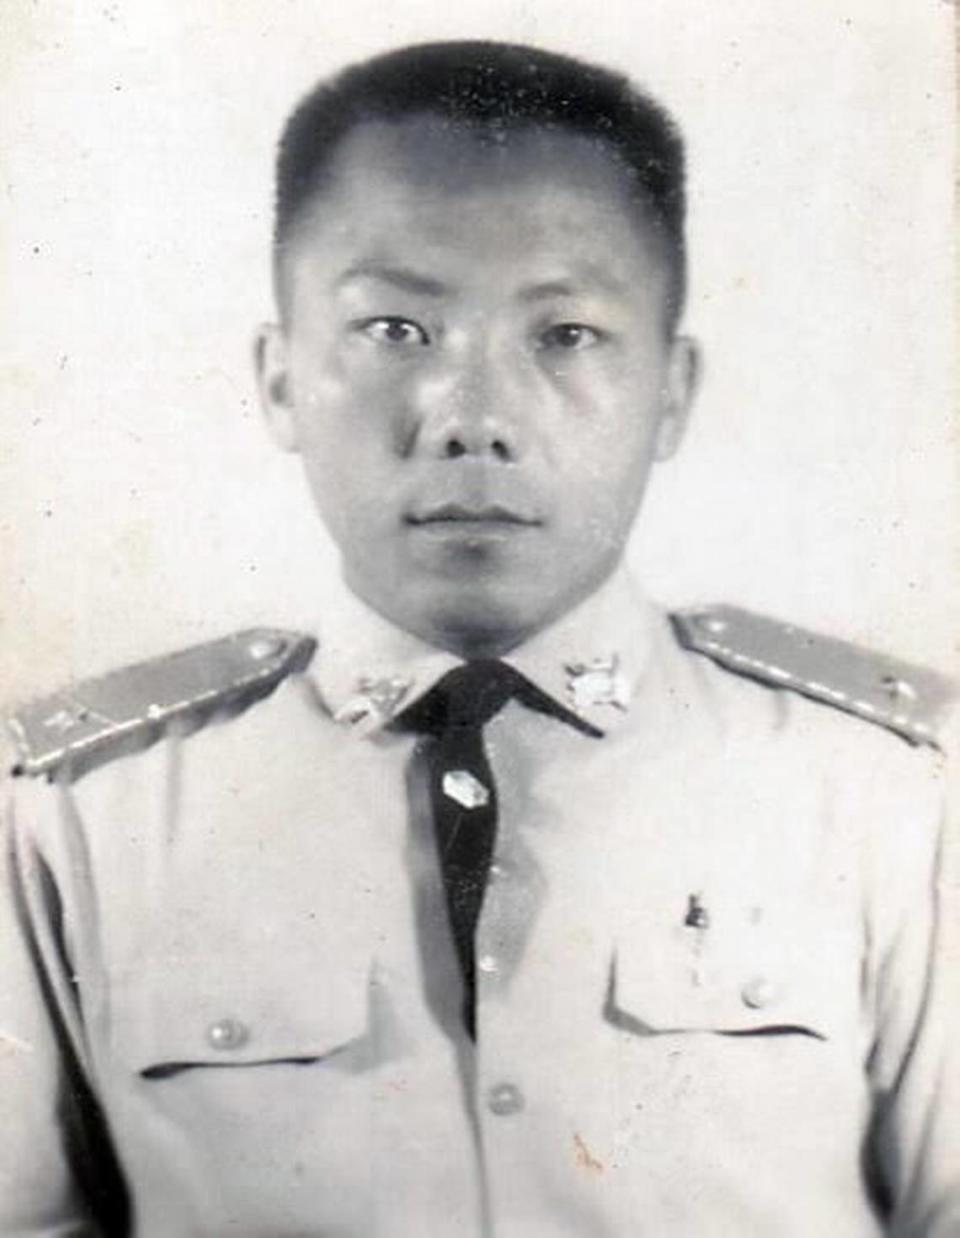 This is an undated photo of Yang Chao Noi, whose son, Tony Yang, says held the rank of commander in the Lao guerrilla forces fighting alongside the CIA during the Vietnam War.